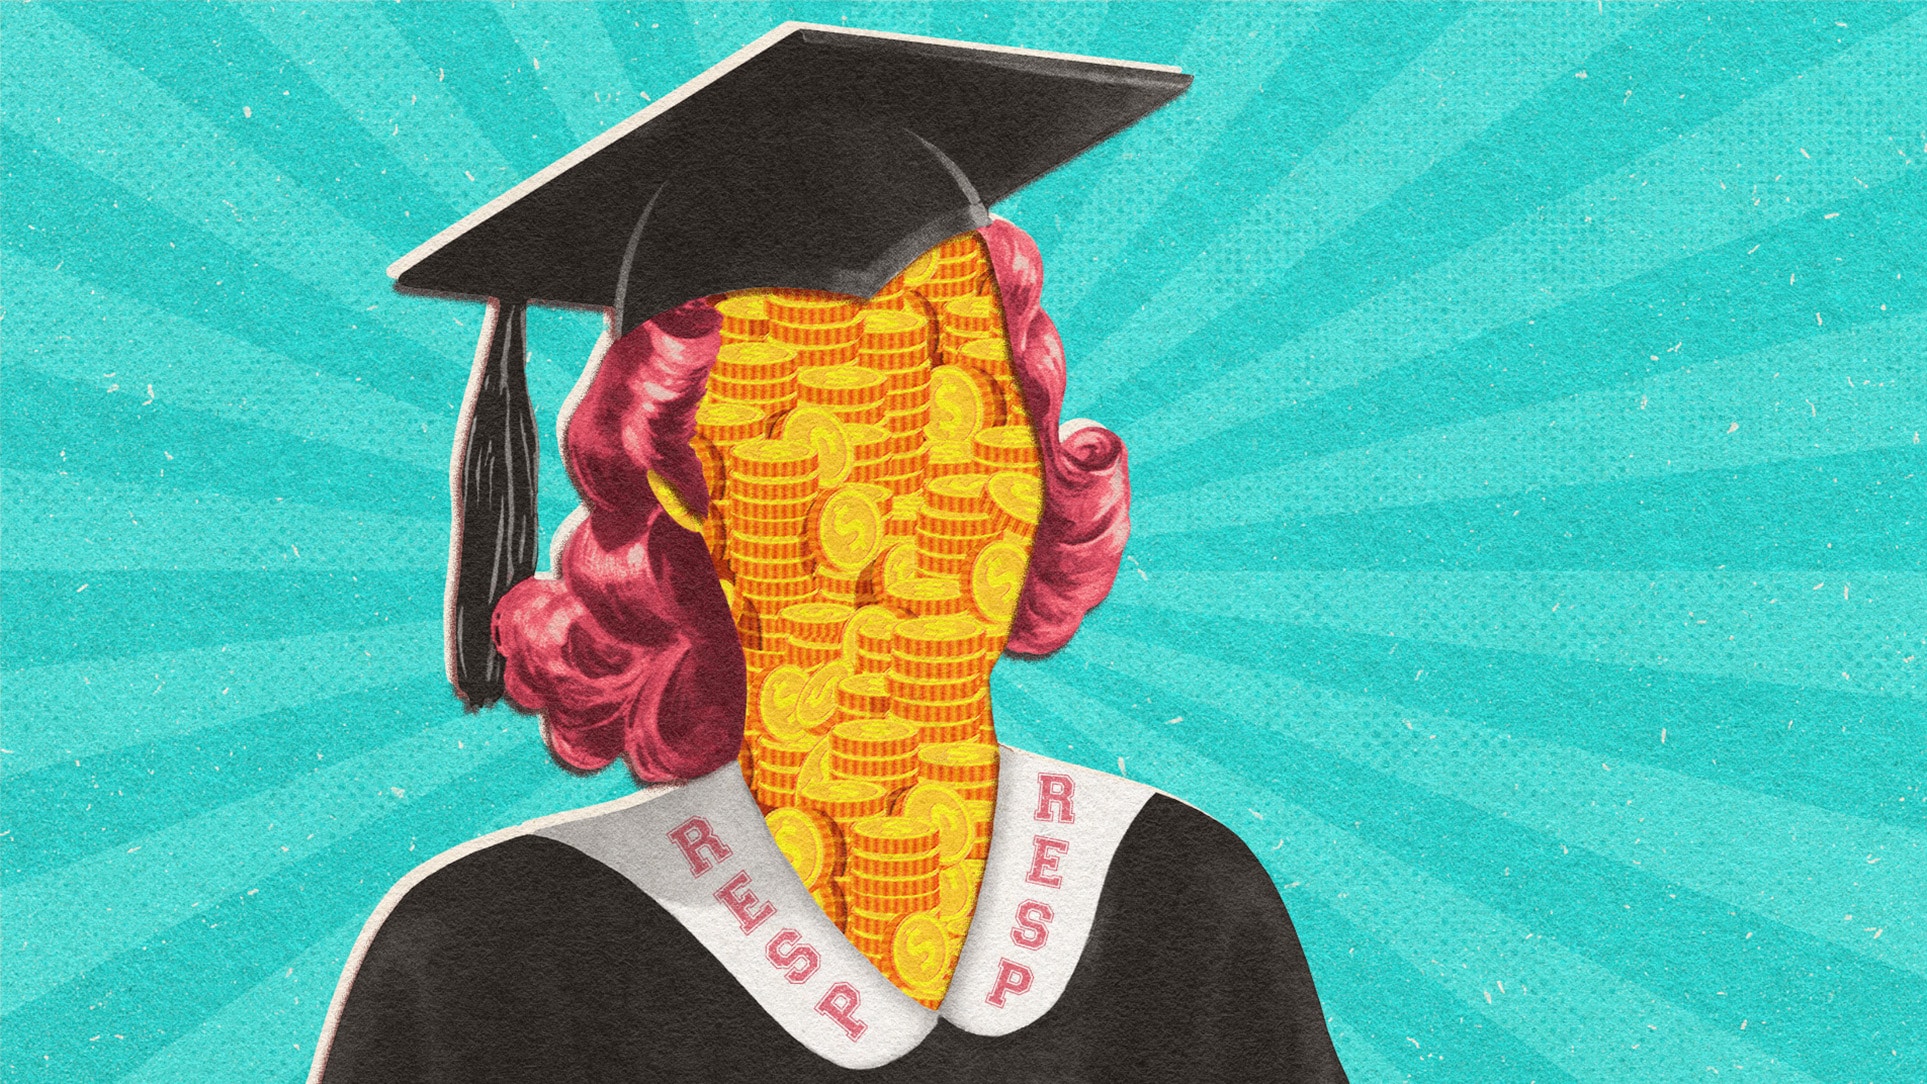 Illustration of a college graduate with pink hair, and coins in place of their face. The letters "RESP" appear on her graduation robe.